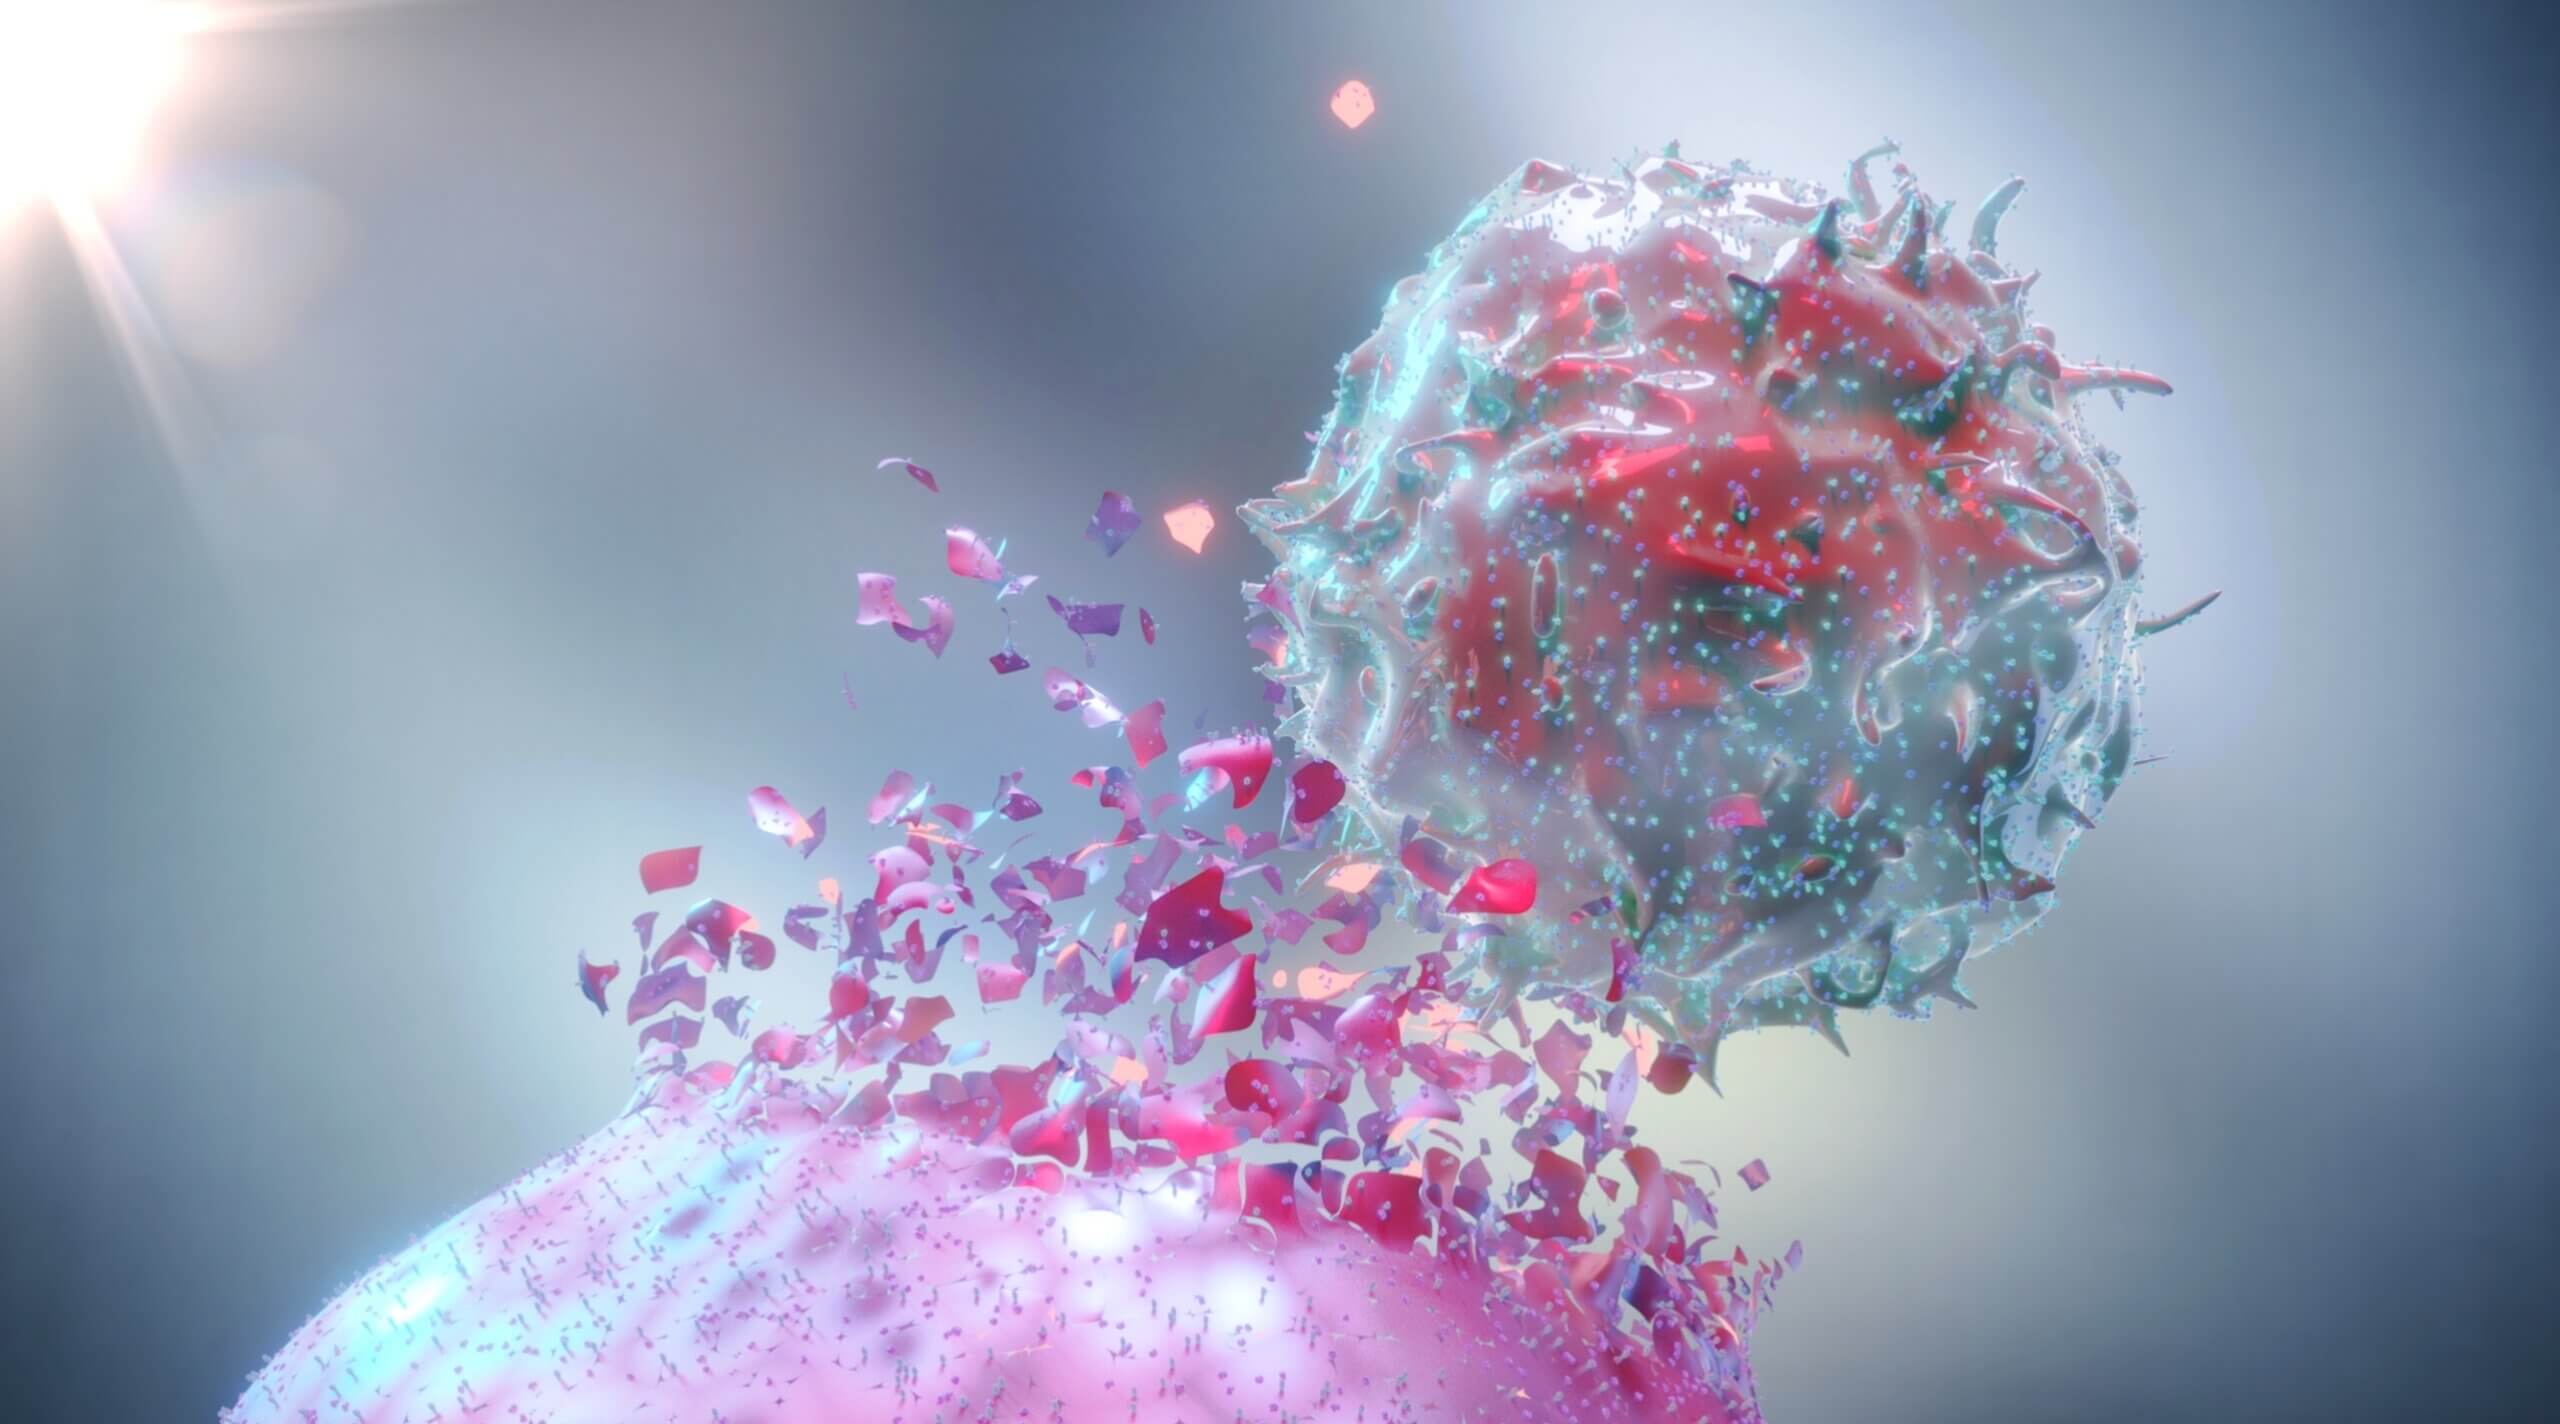 3D Rendering of a Natural Killer Cell (NK Cell) destroying a cancer cell.